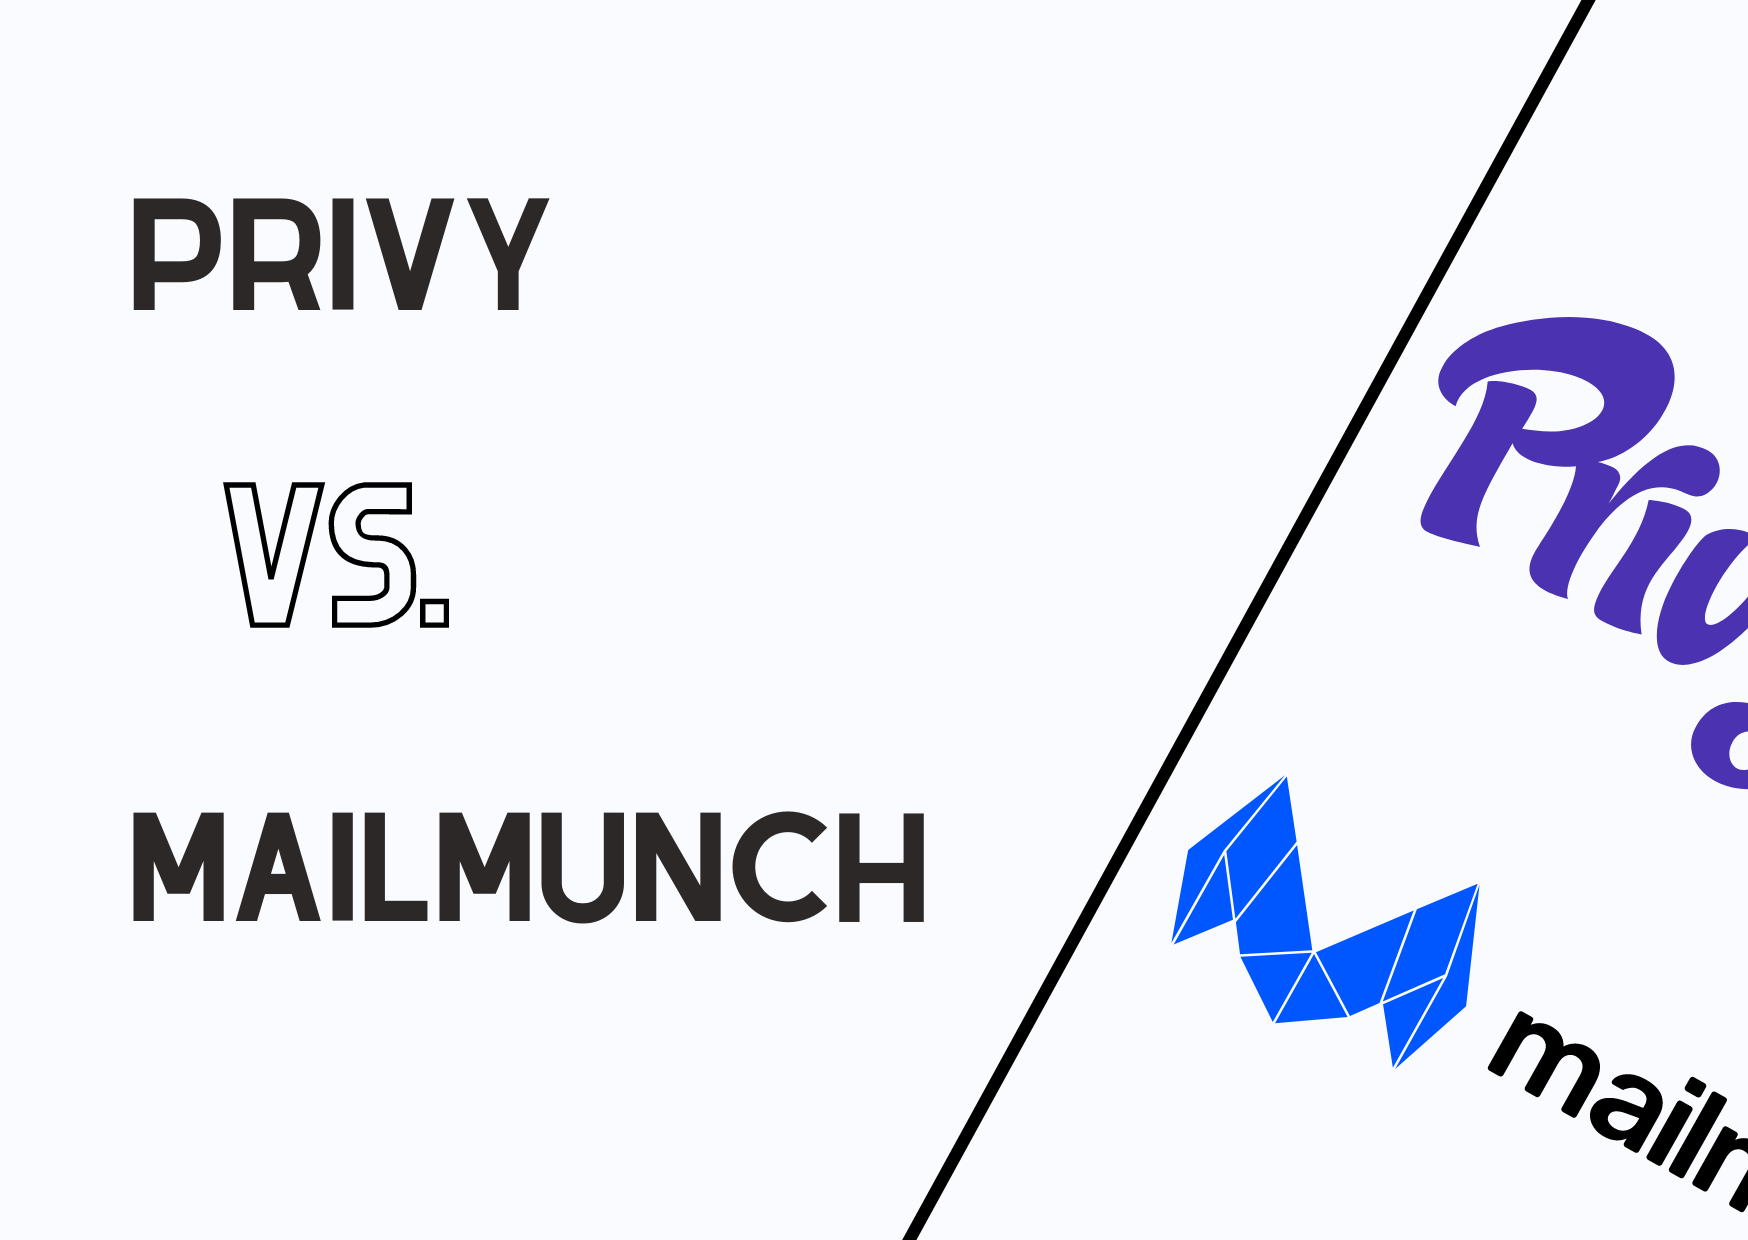 the banner of Privy vs Mailmunch on a fair blue background